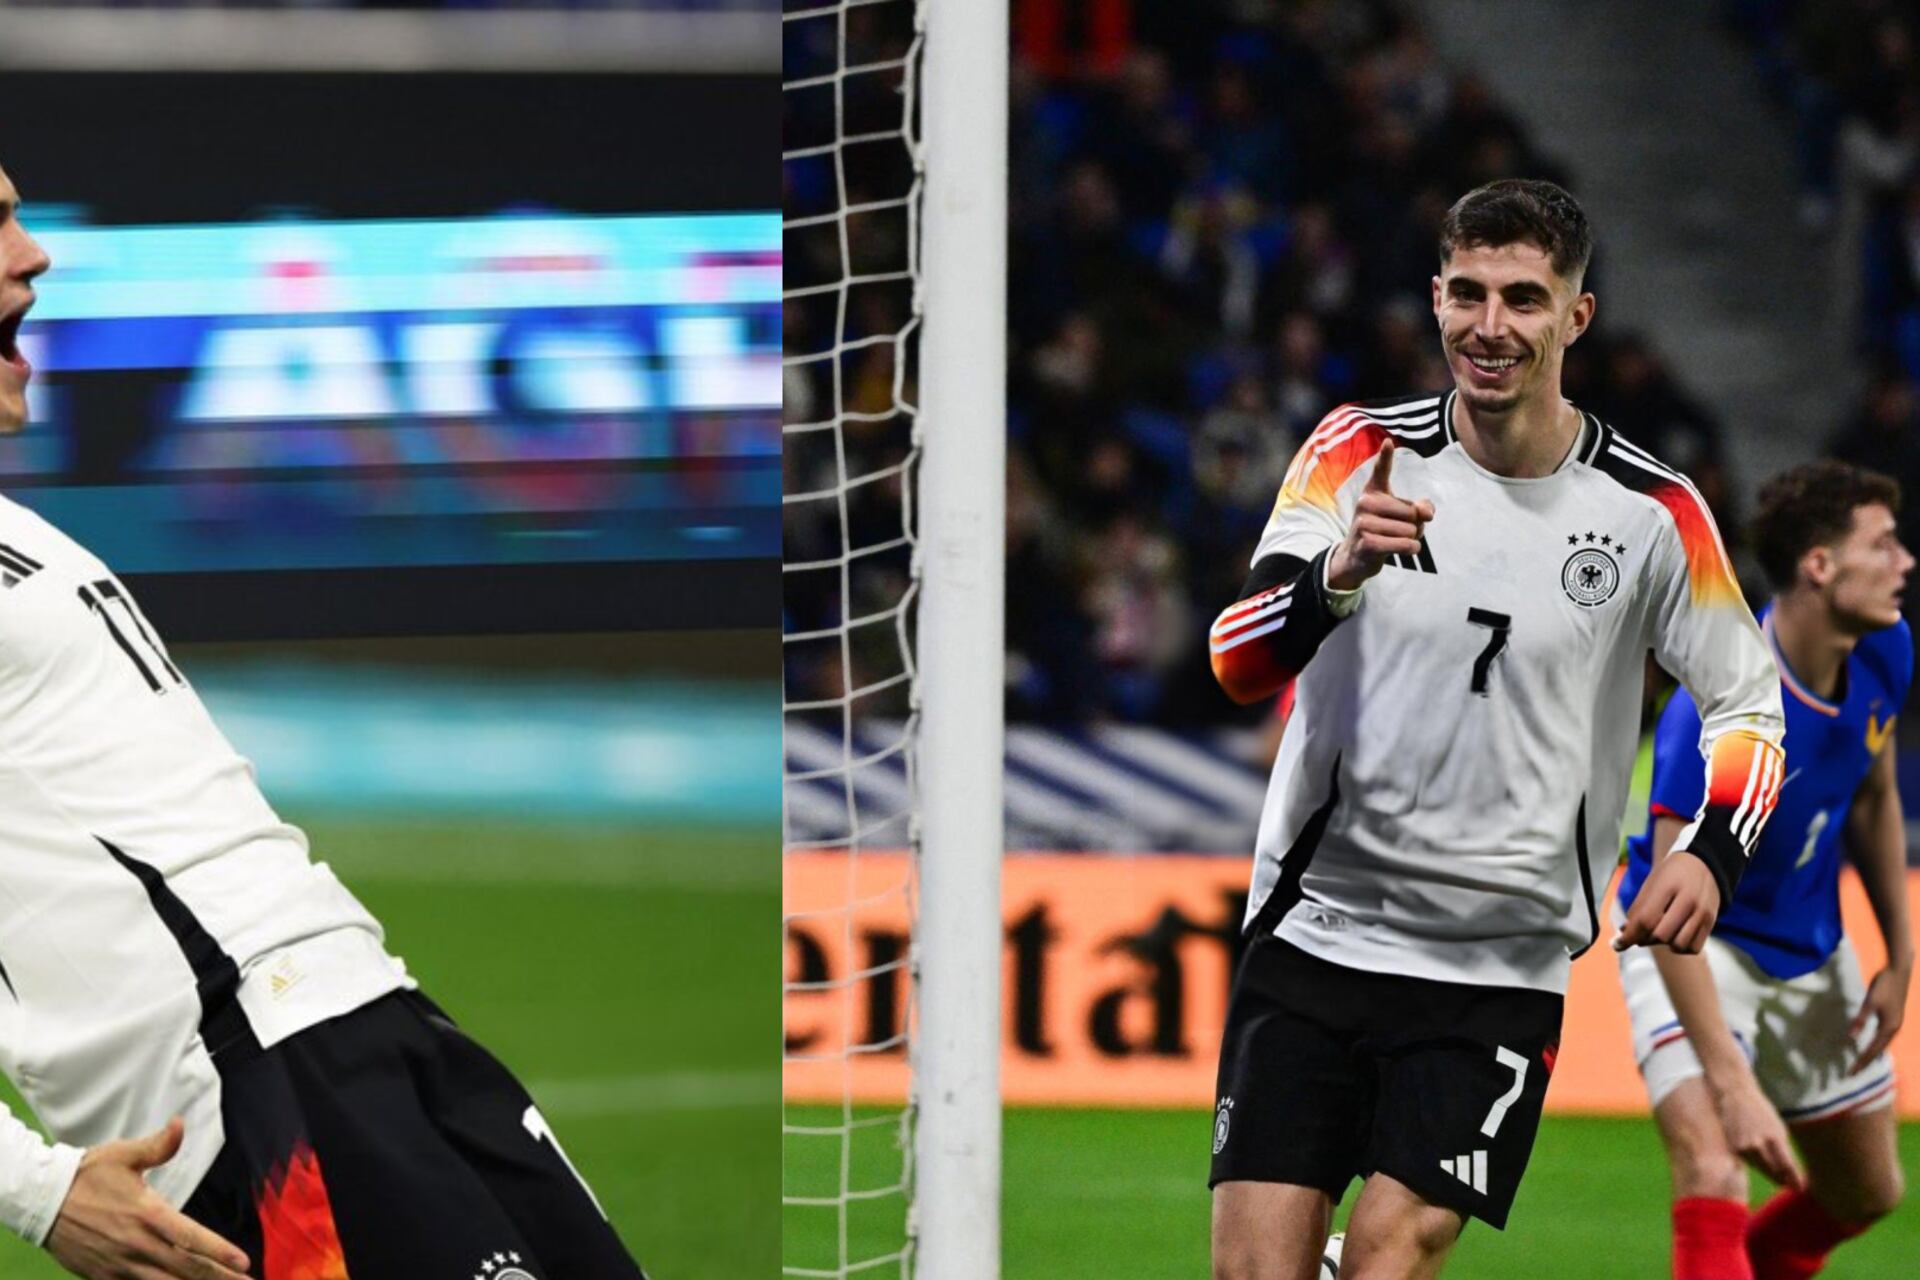 Germany surprises France as they beat them 2-0 as Writz and Havertz score